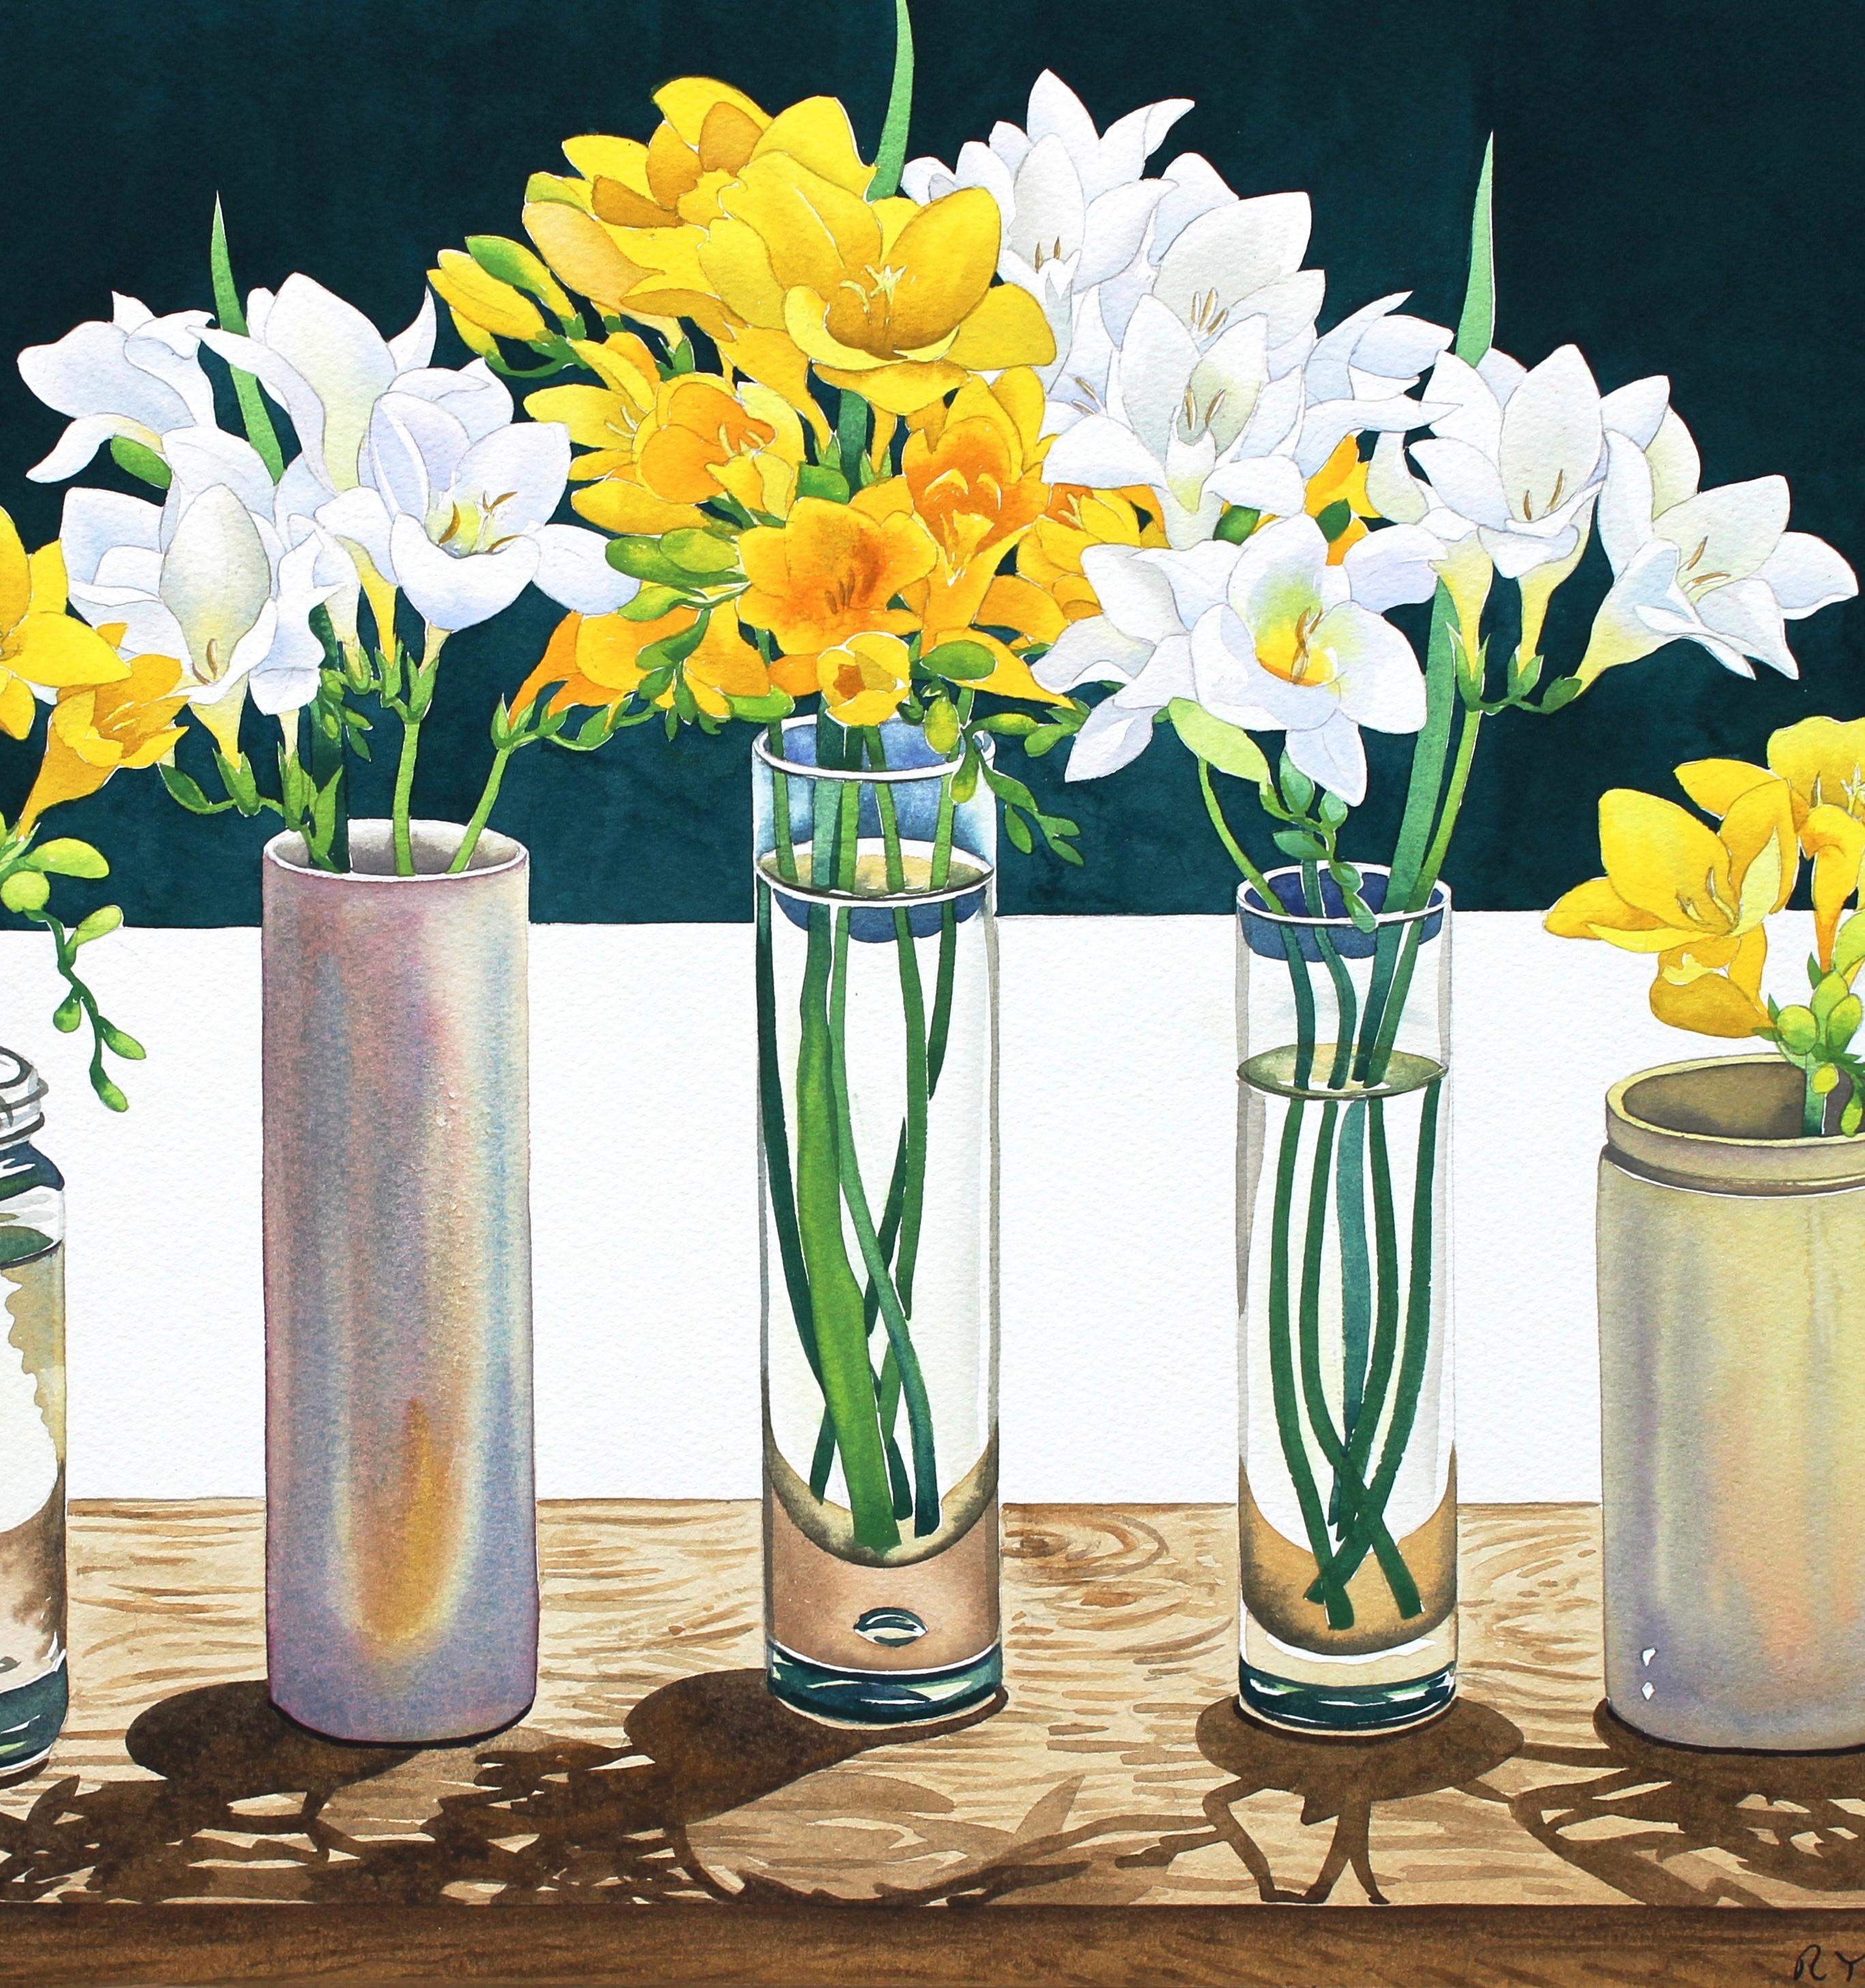 Christoper Ryland (born 1951)
Still life of freesia
Watercolour
16 x 23 inches

Christopher Ryland's flower paintings are in collections all over the world.
 
He is an elected Fellow of the Society of Botanical Artists and has had many solo